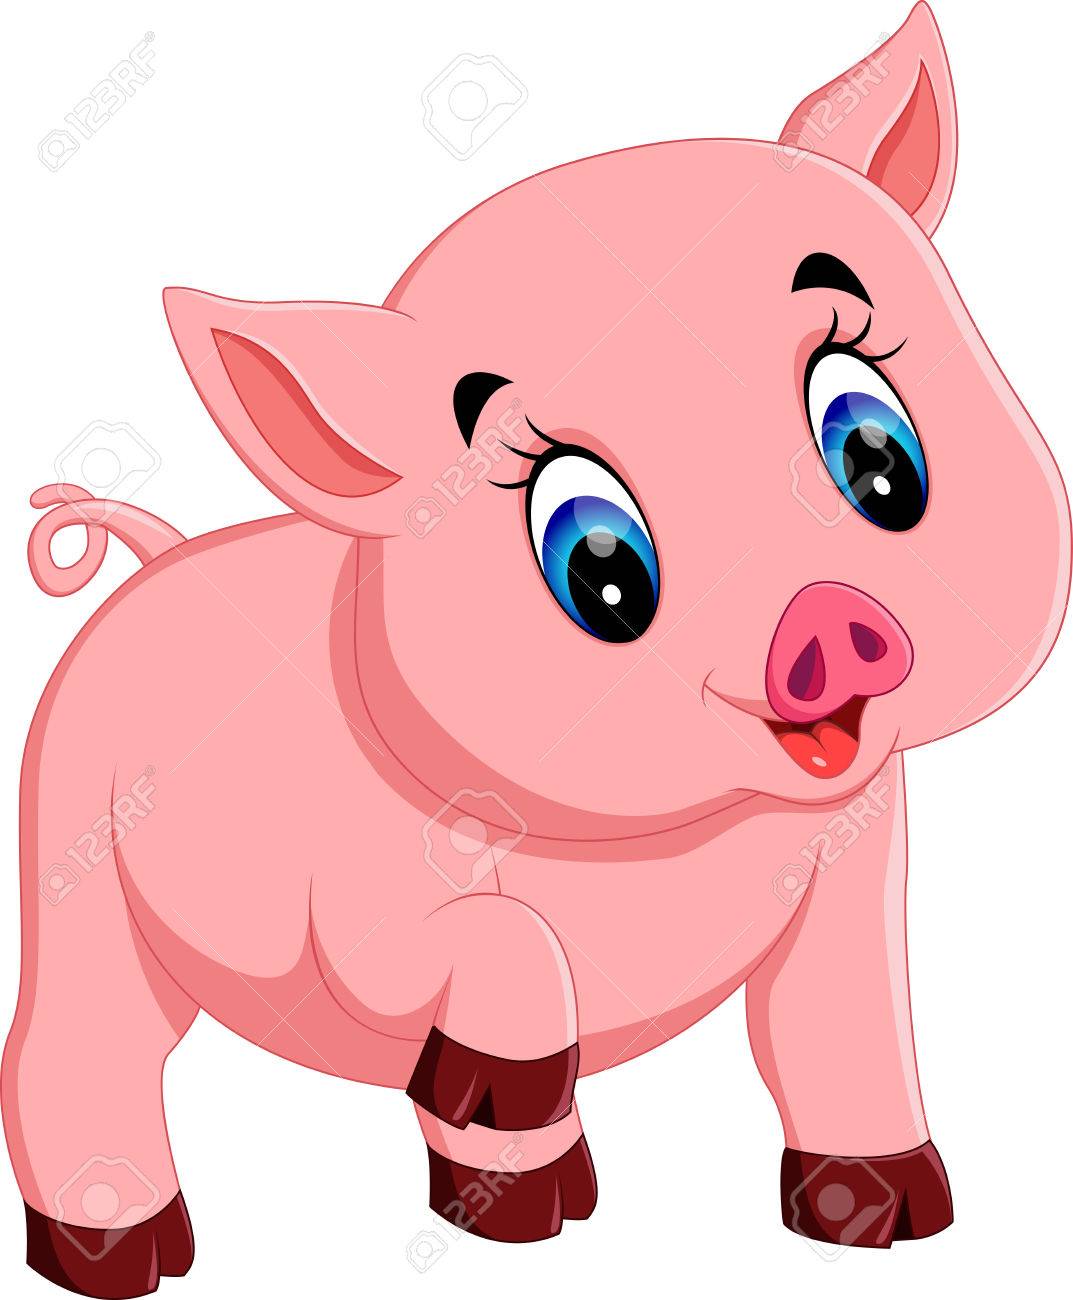 Cute Pig Pictures Cartoon | Free download on ClipArtMag